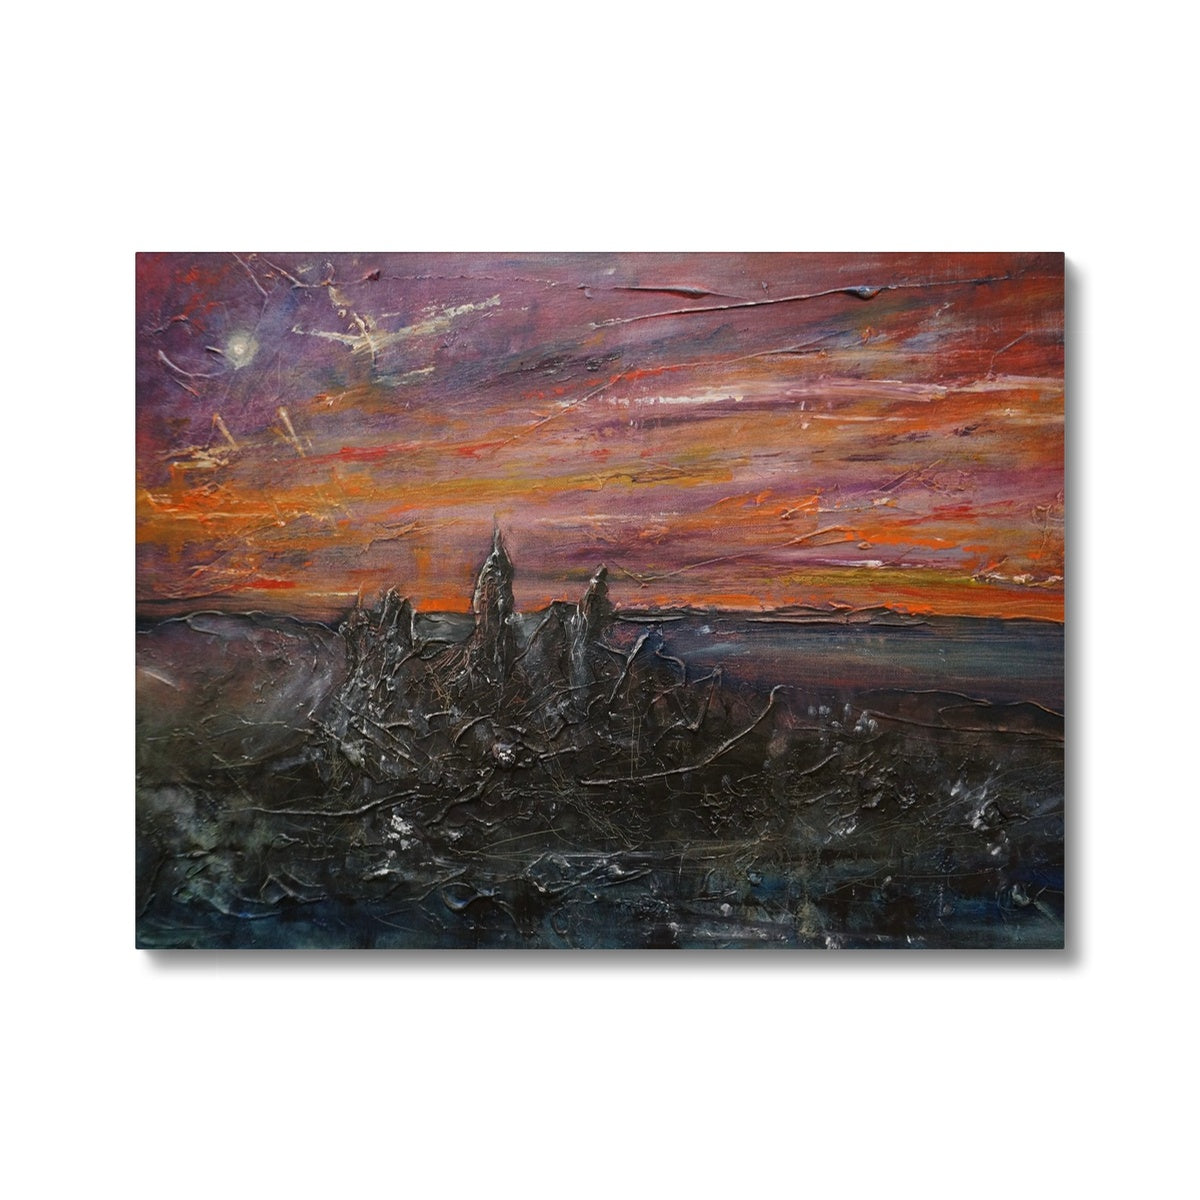 Storr Moonlight Skye Painting | Canvas From Scotland-Contemporary Stretched Canvas Prints-Skye Art Gallery-24"x18"-Paintings, Prints, Homeware, Art Gifts From Scotland By Scottish Artist Kevin Hunter